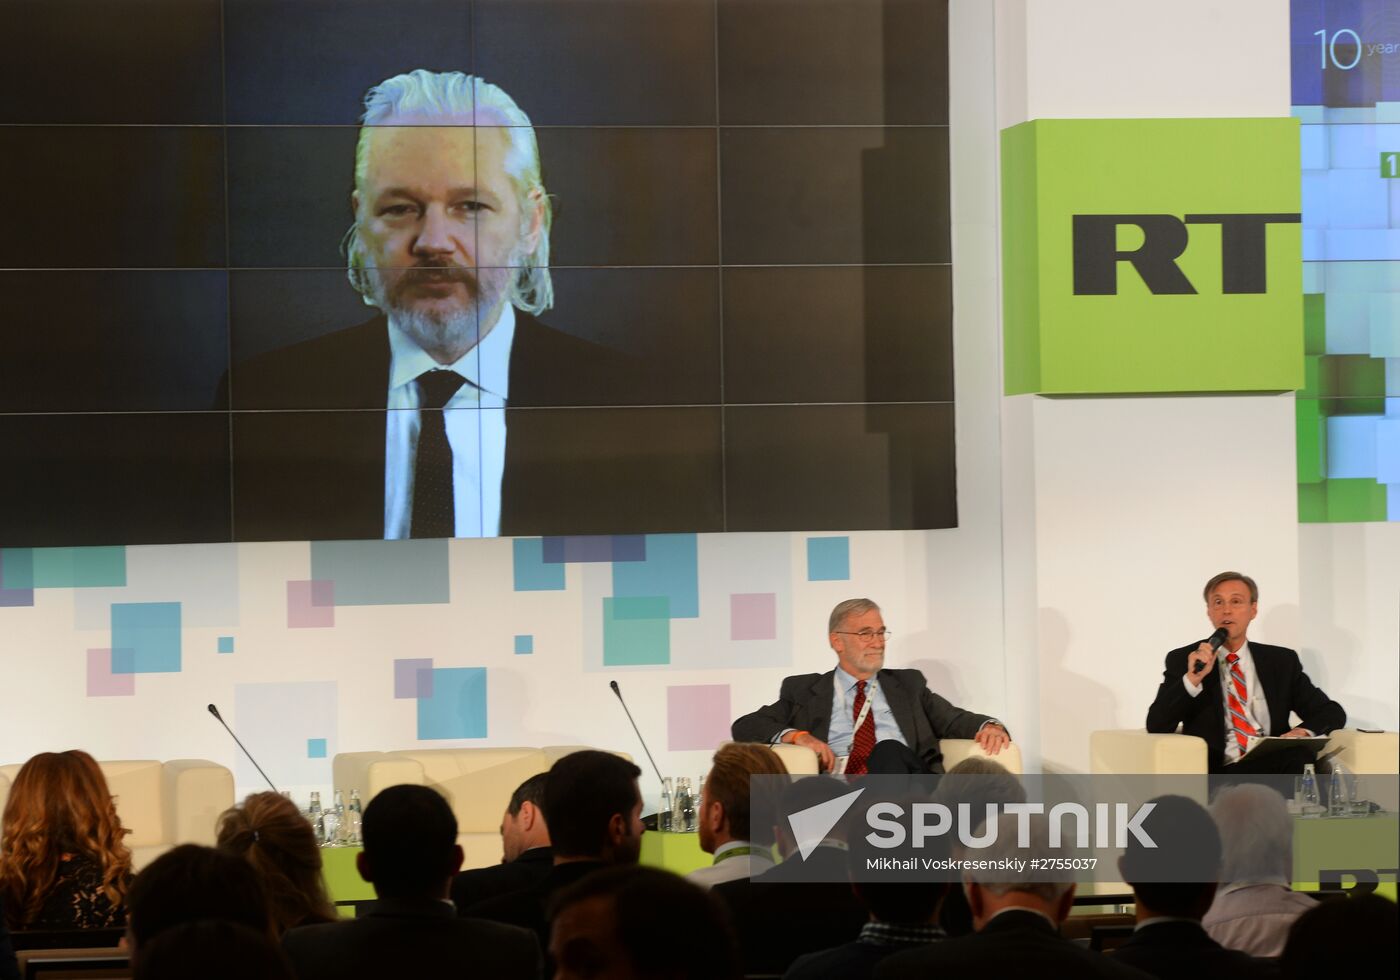 RT conference, Shape-shifting Powers in Today’s World